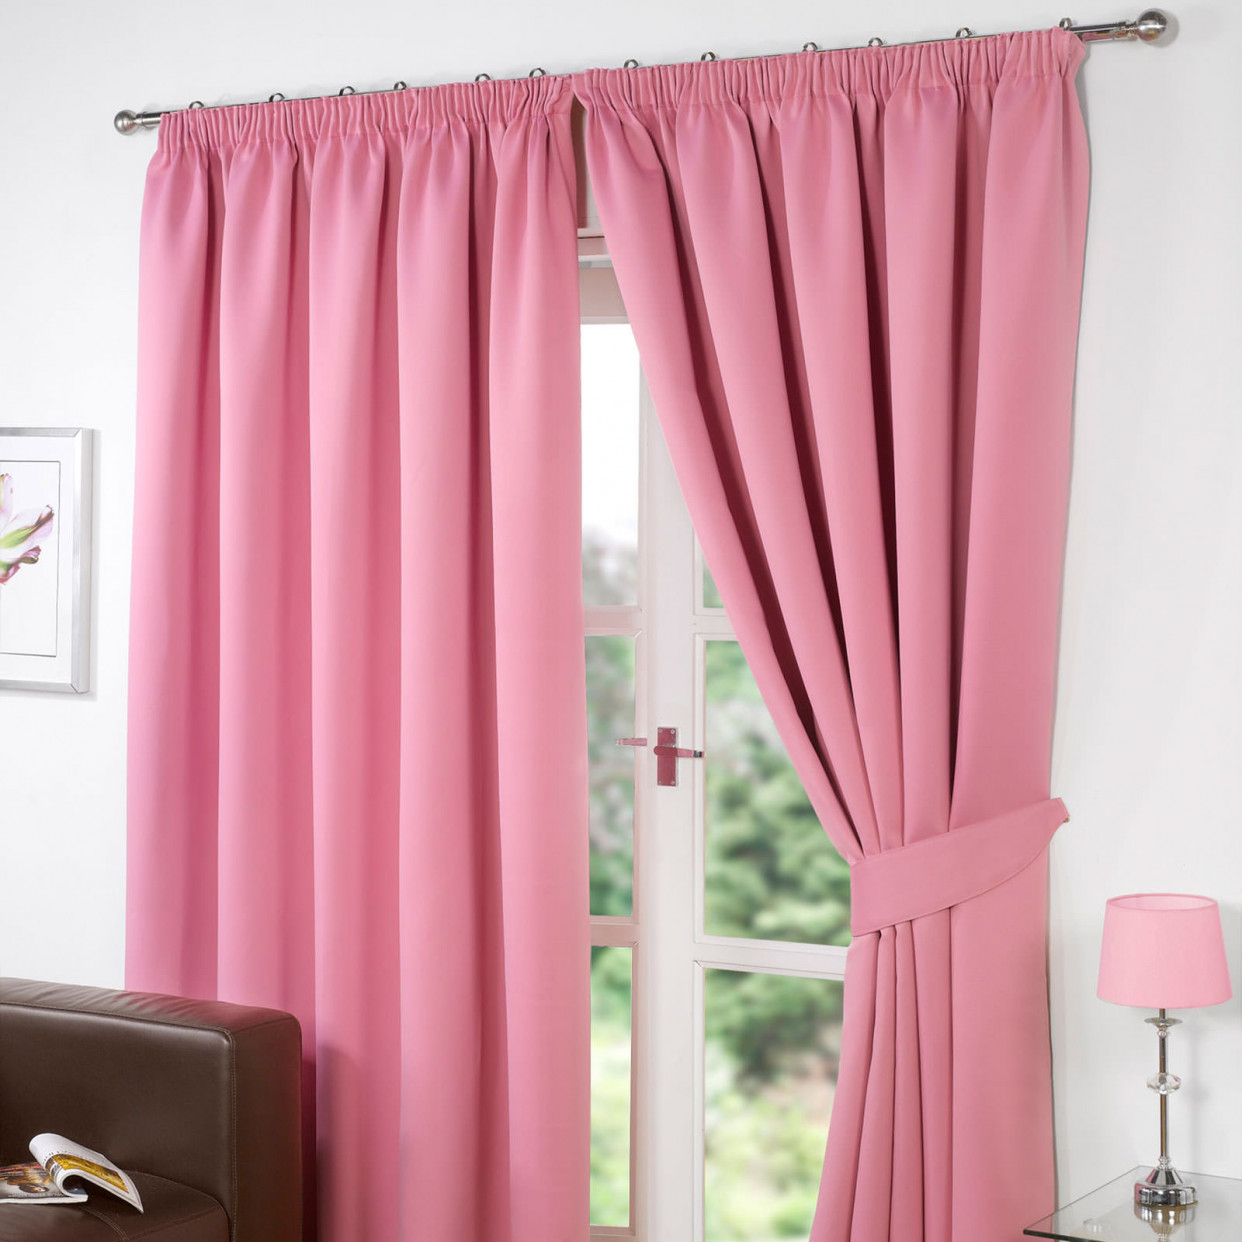 Pencil Pleat Thermal Blackout Fully Lined Curtains - Pink 66x54>